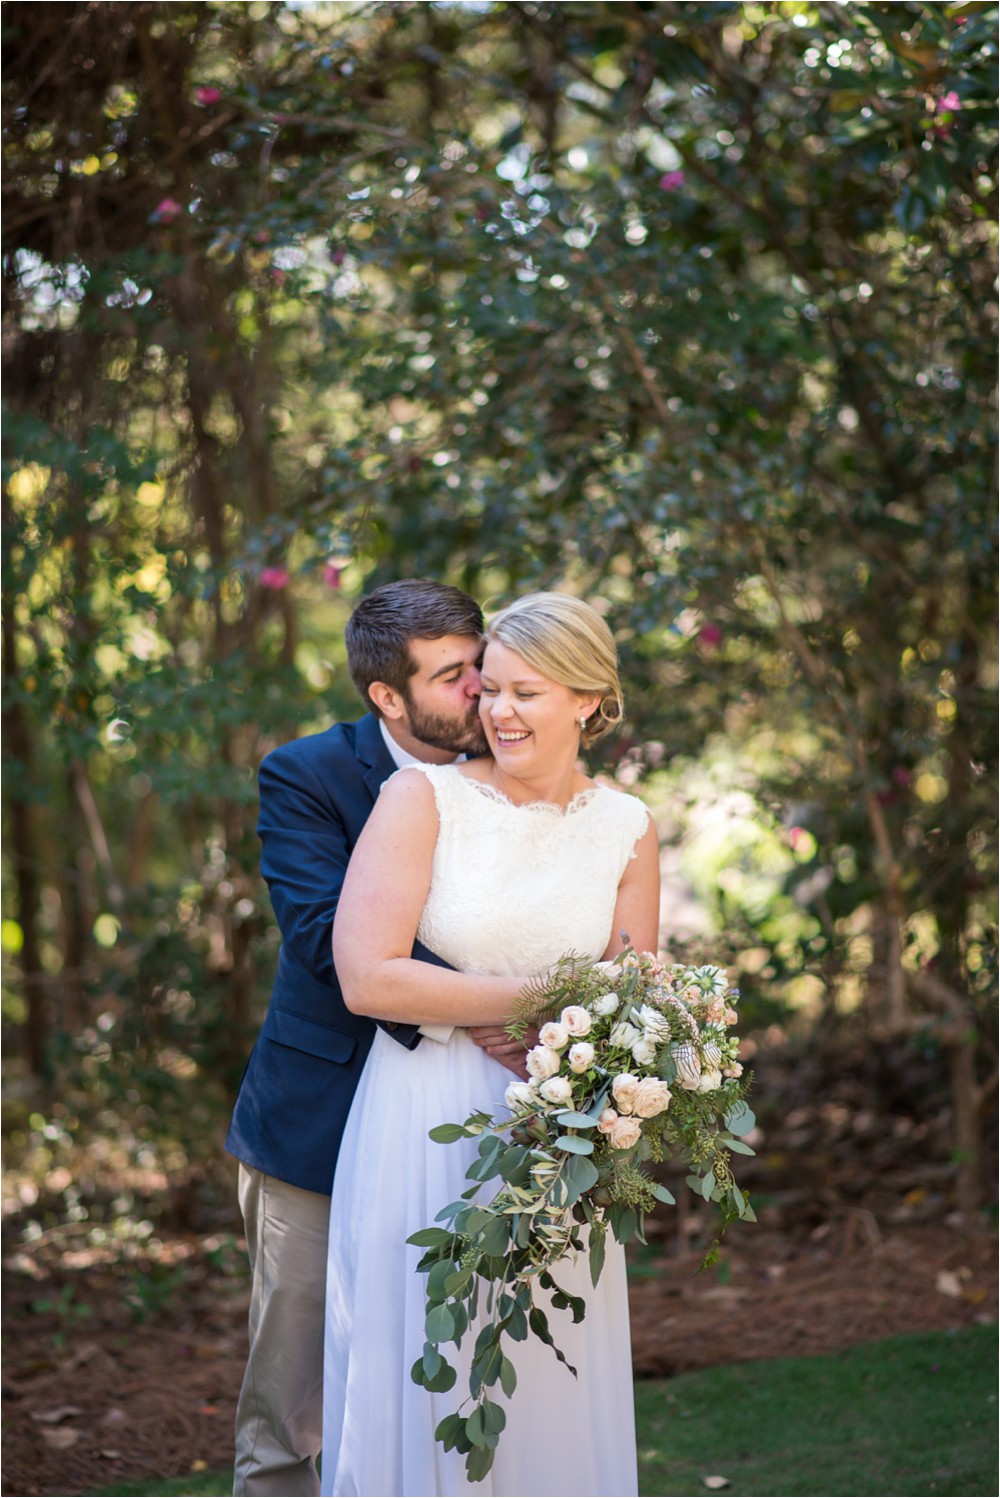 intimate-outdoor-wedding-at-home-in-columbus-georgia-by-eliza-morrill-photography_0019